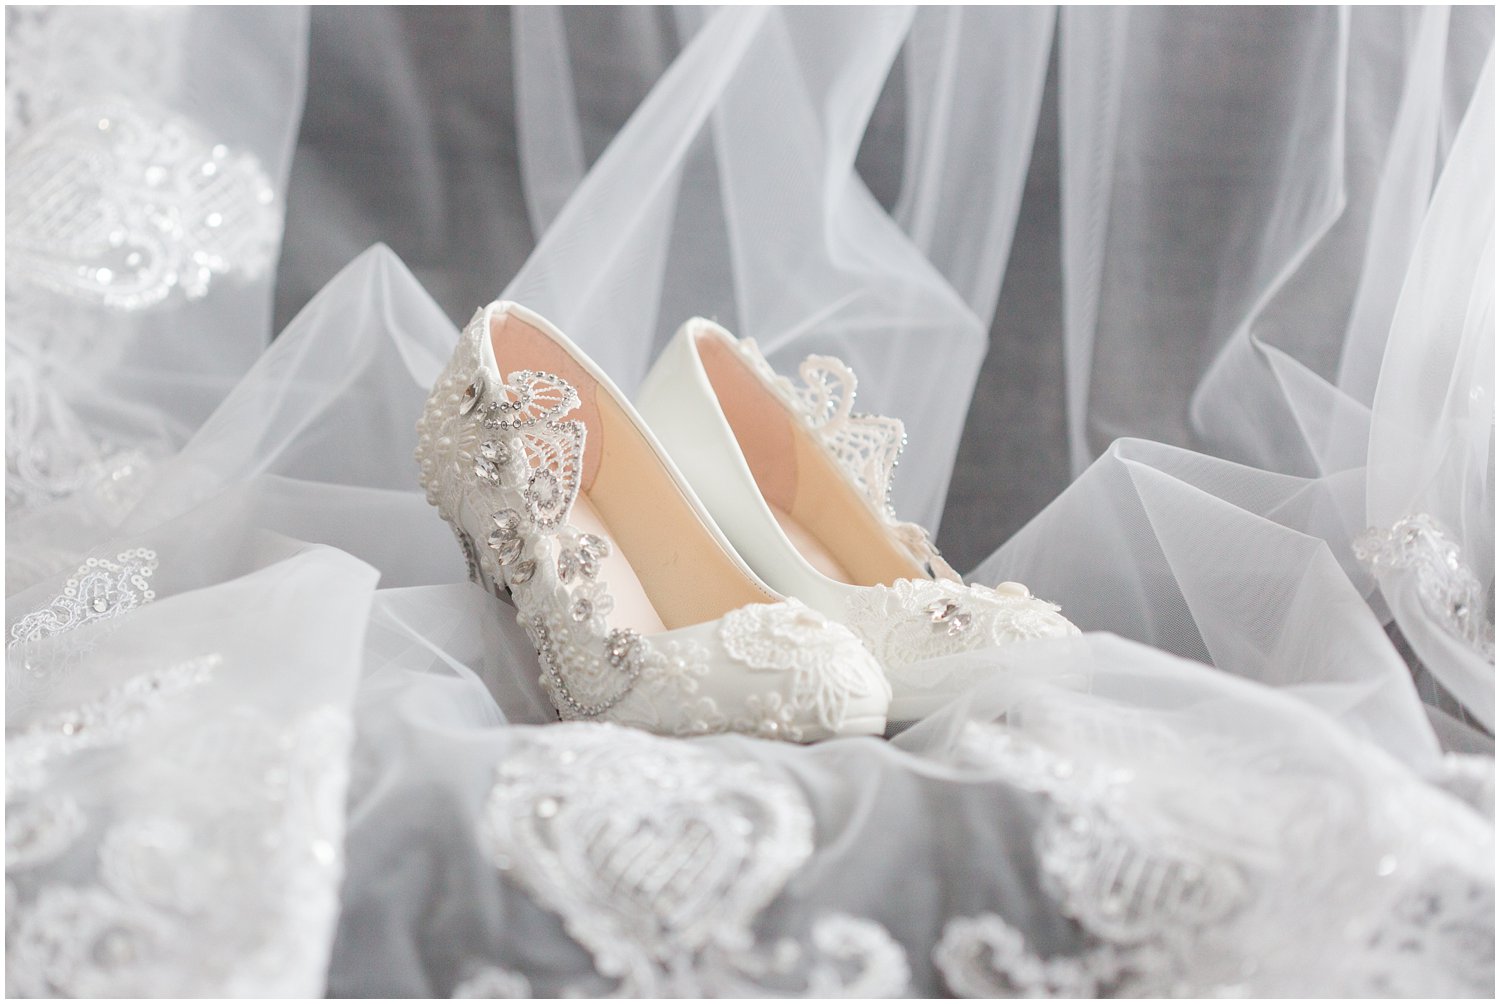 Lacey jeweled bridal shoes 